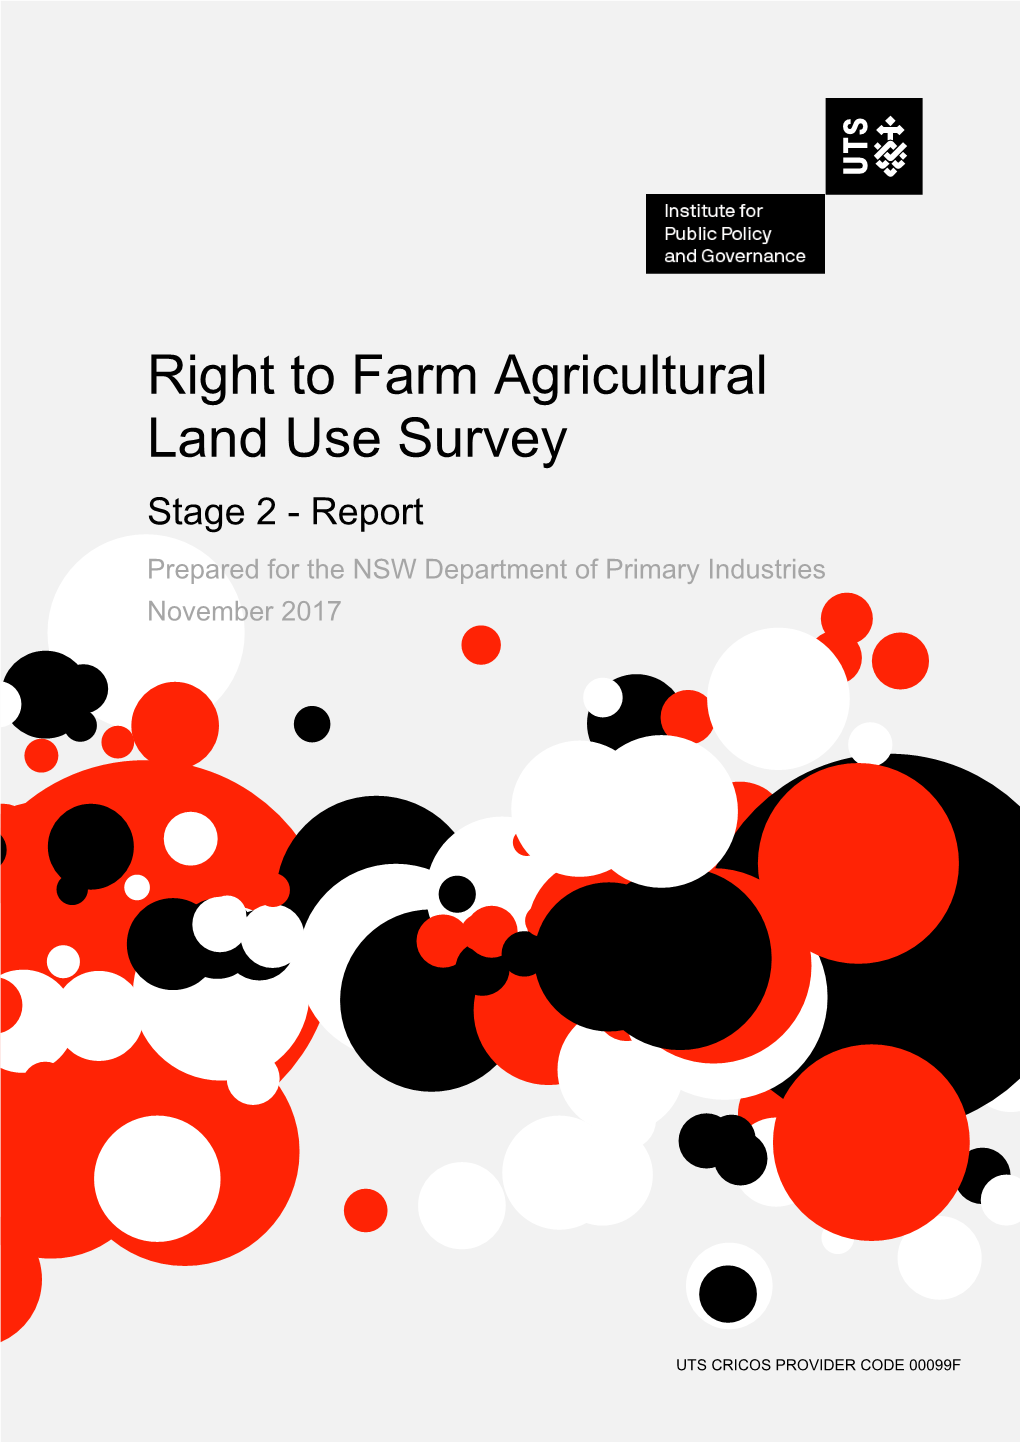 Right to Farm Agricultural Land Use Survey Stage 2 - Report Prepared for the NSW Department of Primary Industries November 2017